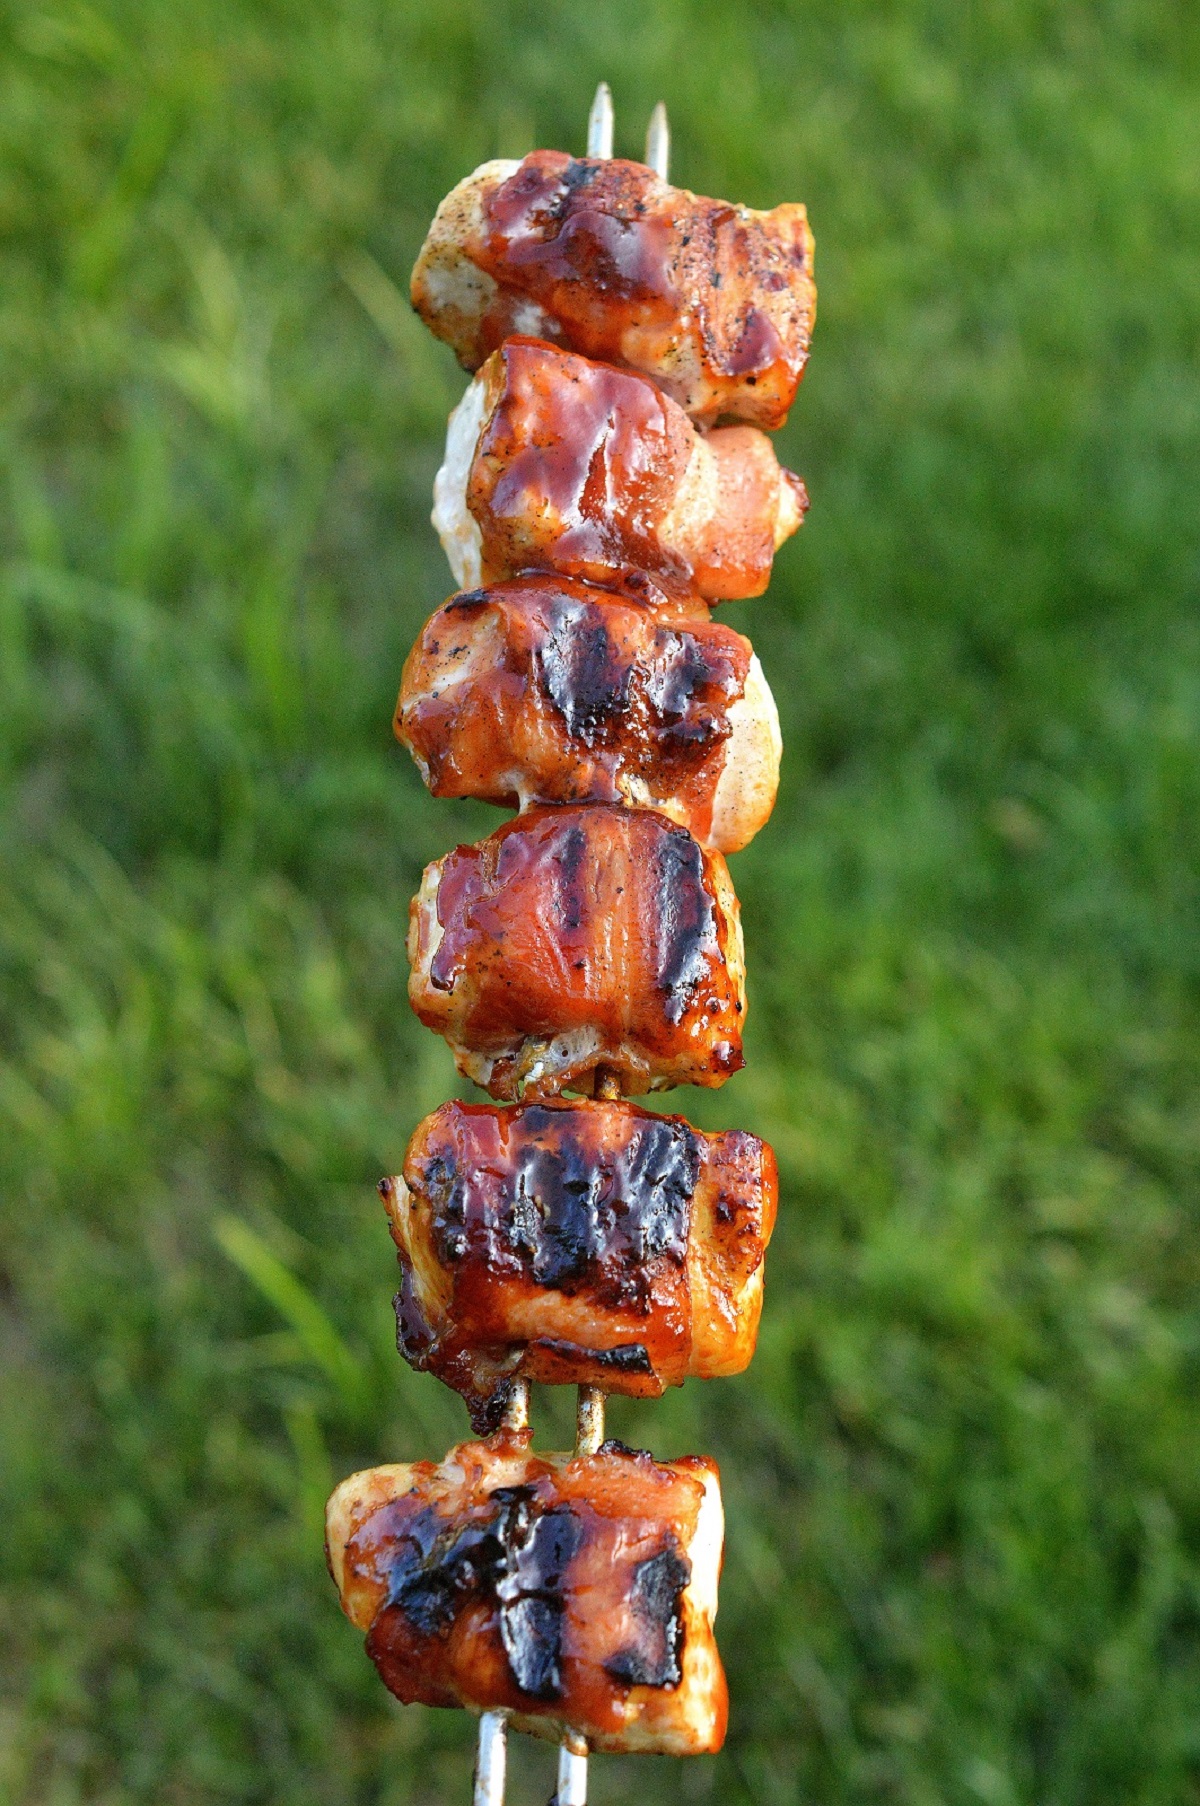 BBQ Bacon Wrapped Chicken on skewers. Bacon Wrapped Chicken Tenders on a metal skewer brushed with BBQ sauce.